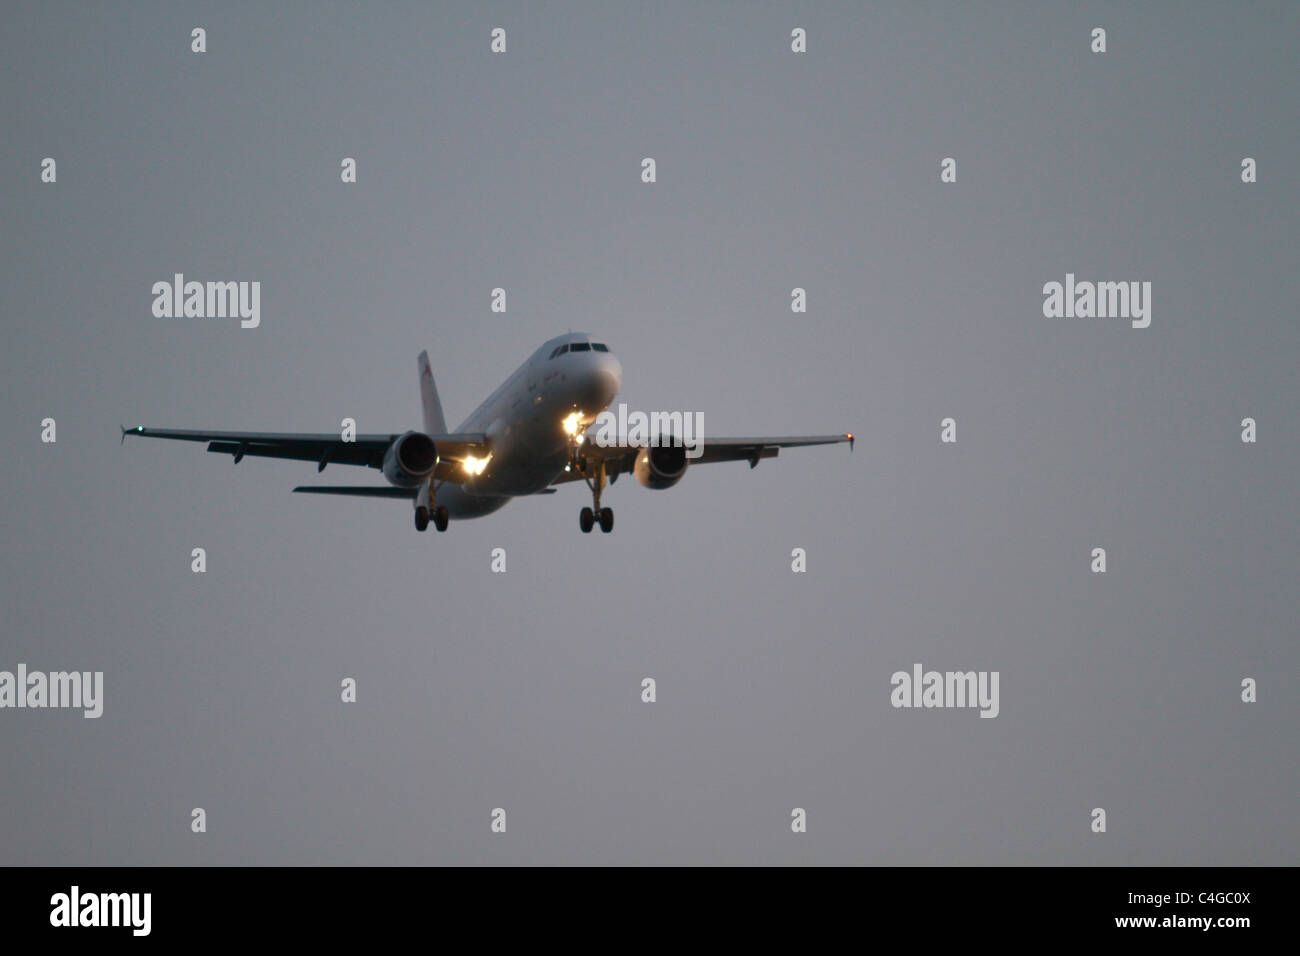 Tunisair Airbus A320-211 Taking Off from Tunis-Carthage Intl Airport. Stock Photo